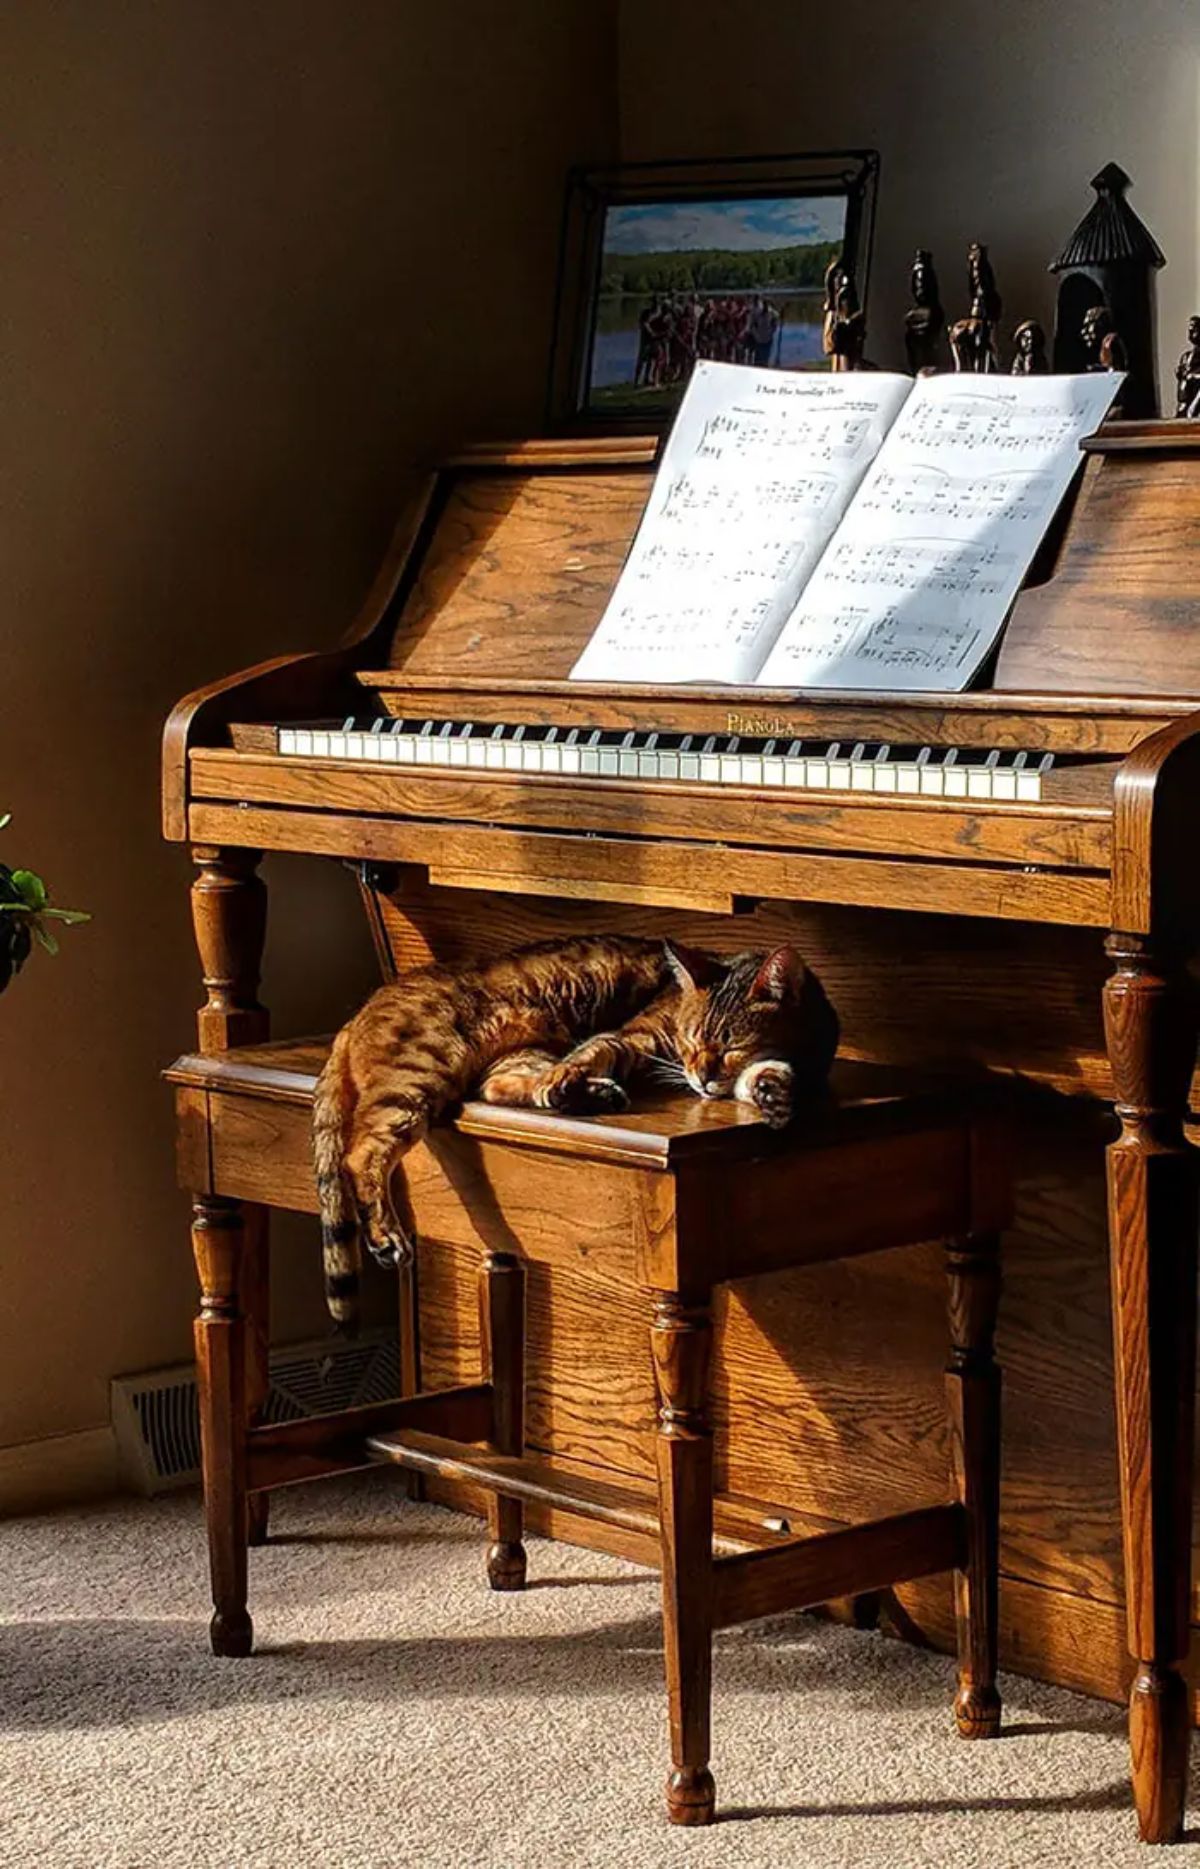 brown tabby cat laying on a wooden piano bench under a brown piano with a music book open